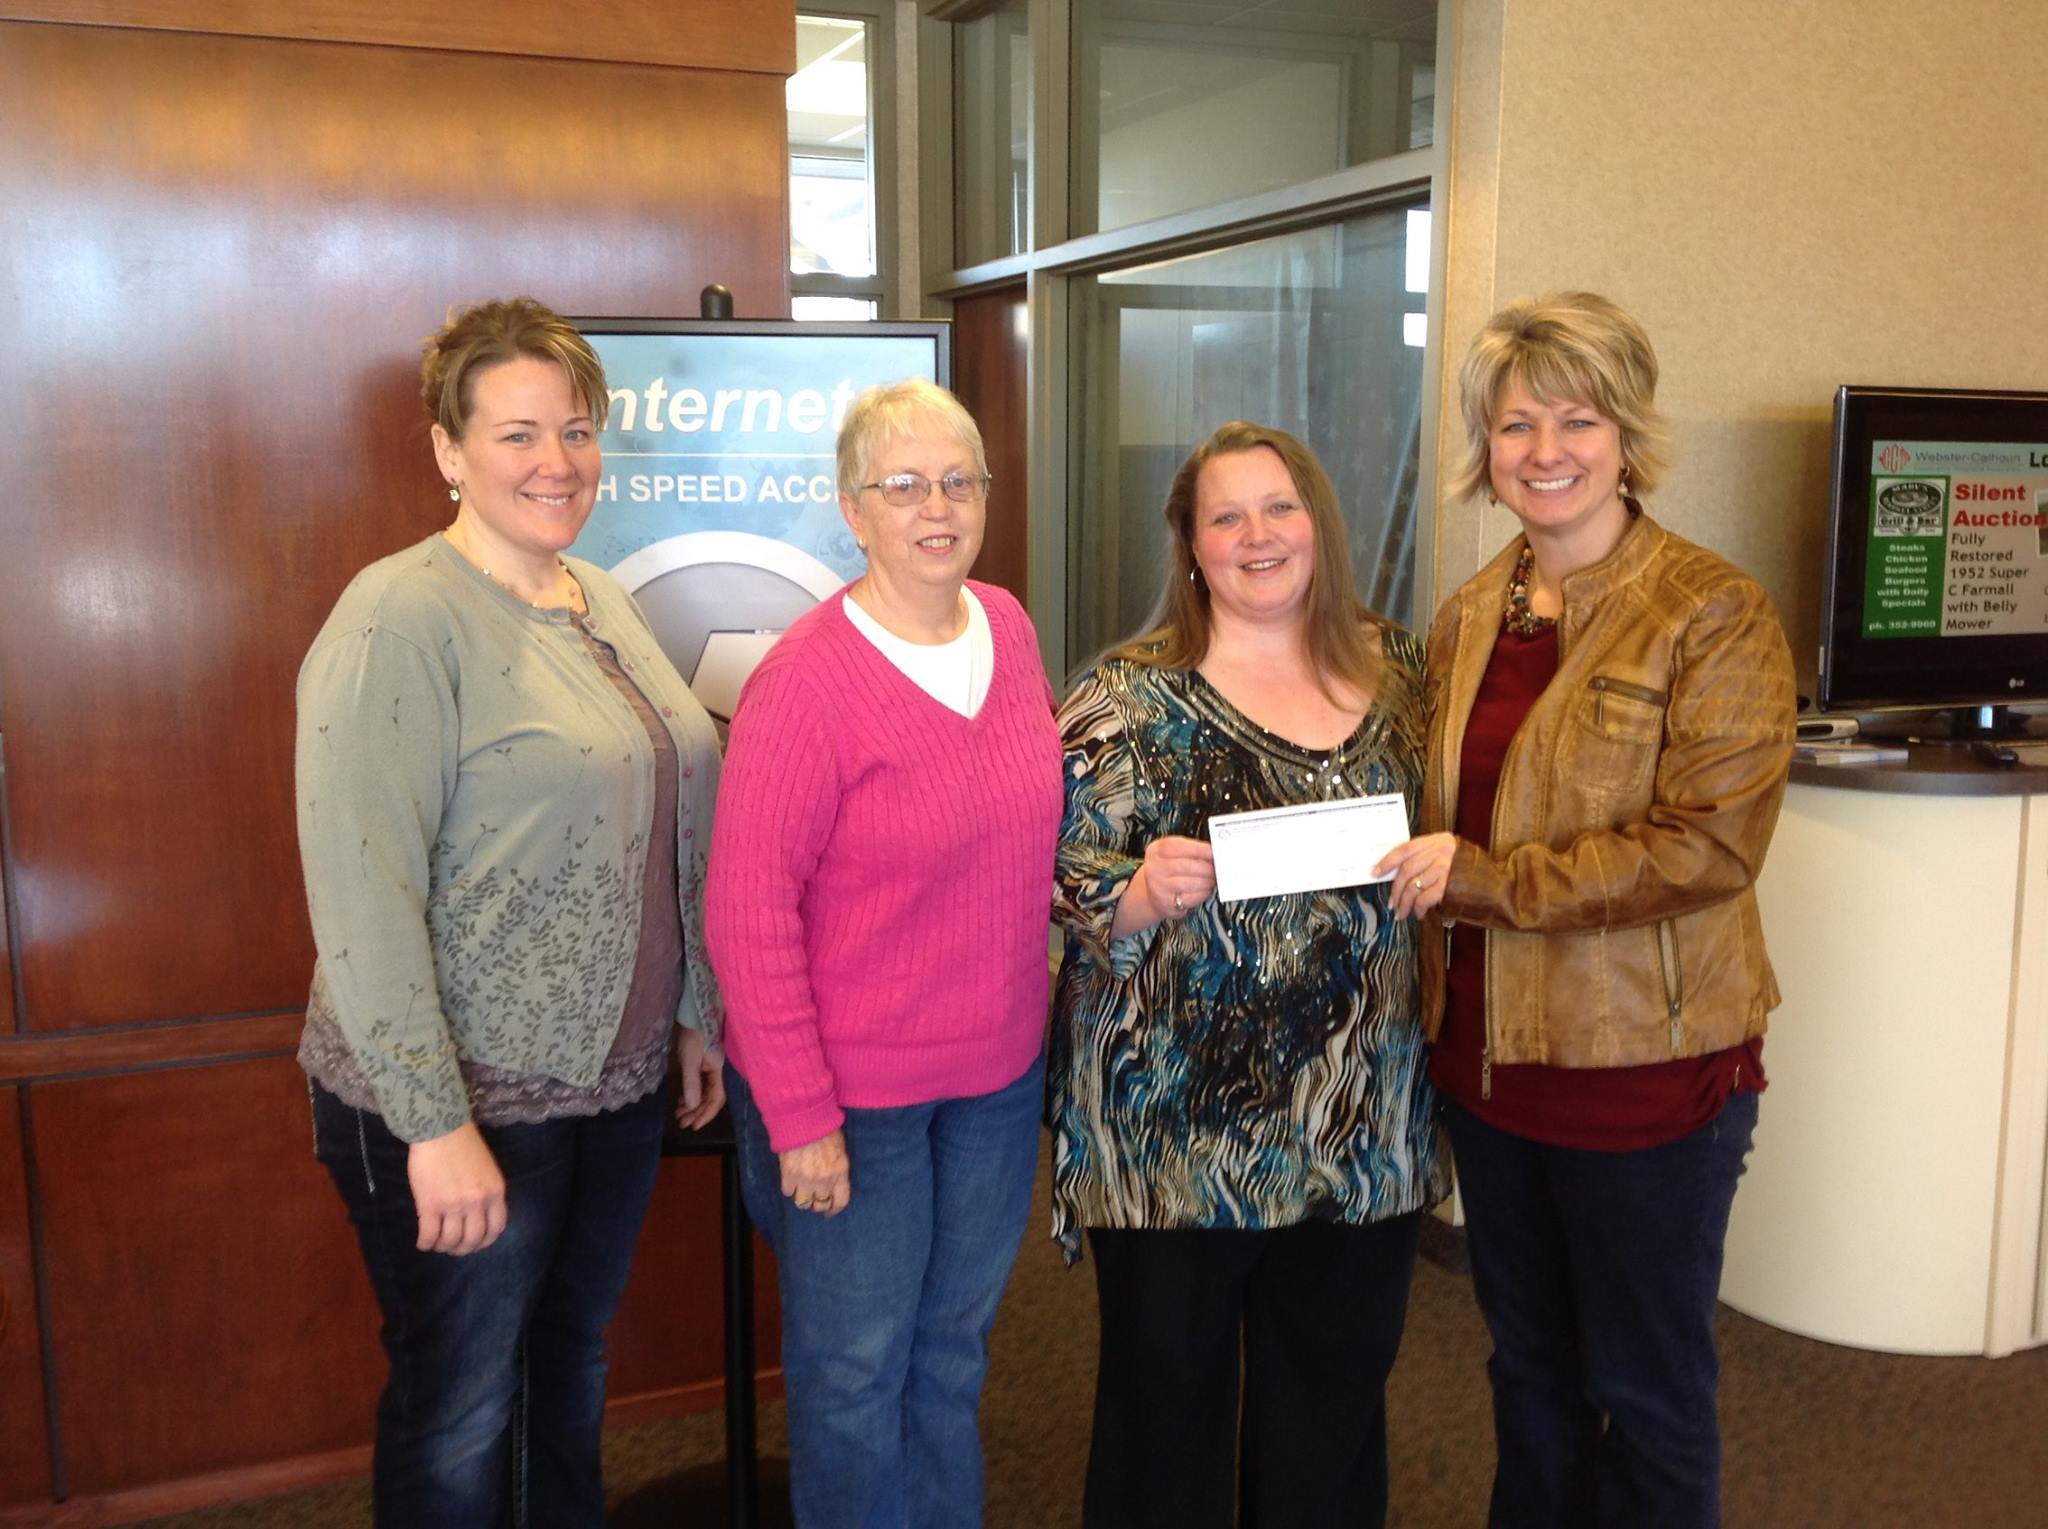 WCCTA representative Marcie Boerner presents check to Candy Bilstad, Colleen Goodwin and Judy Harvey